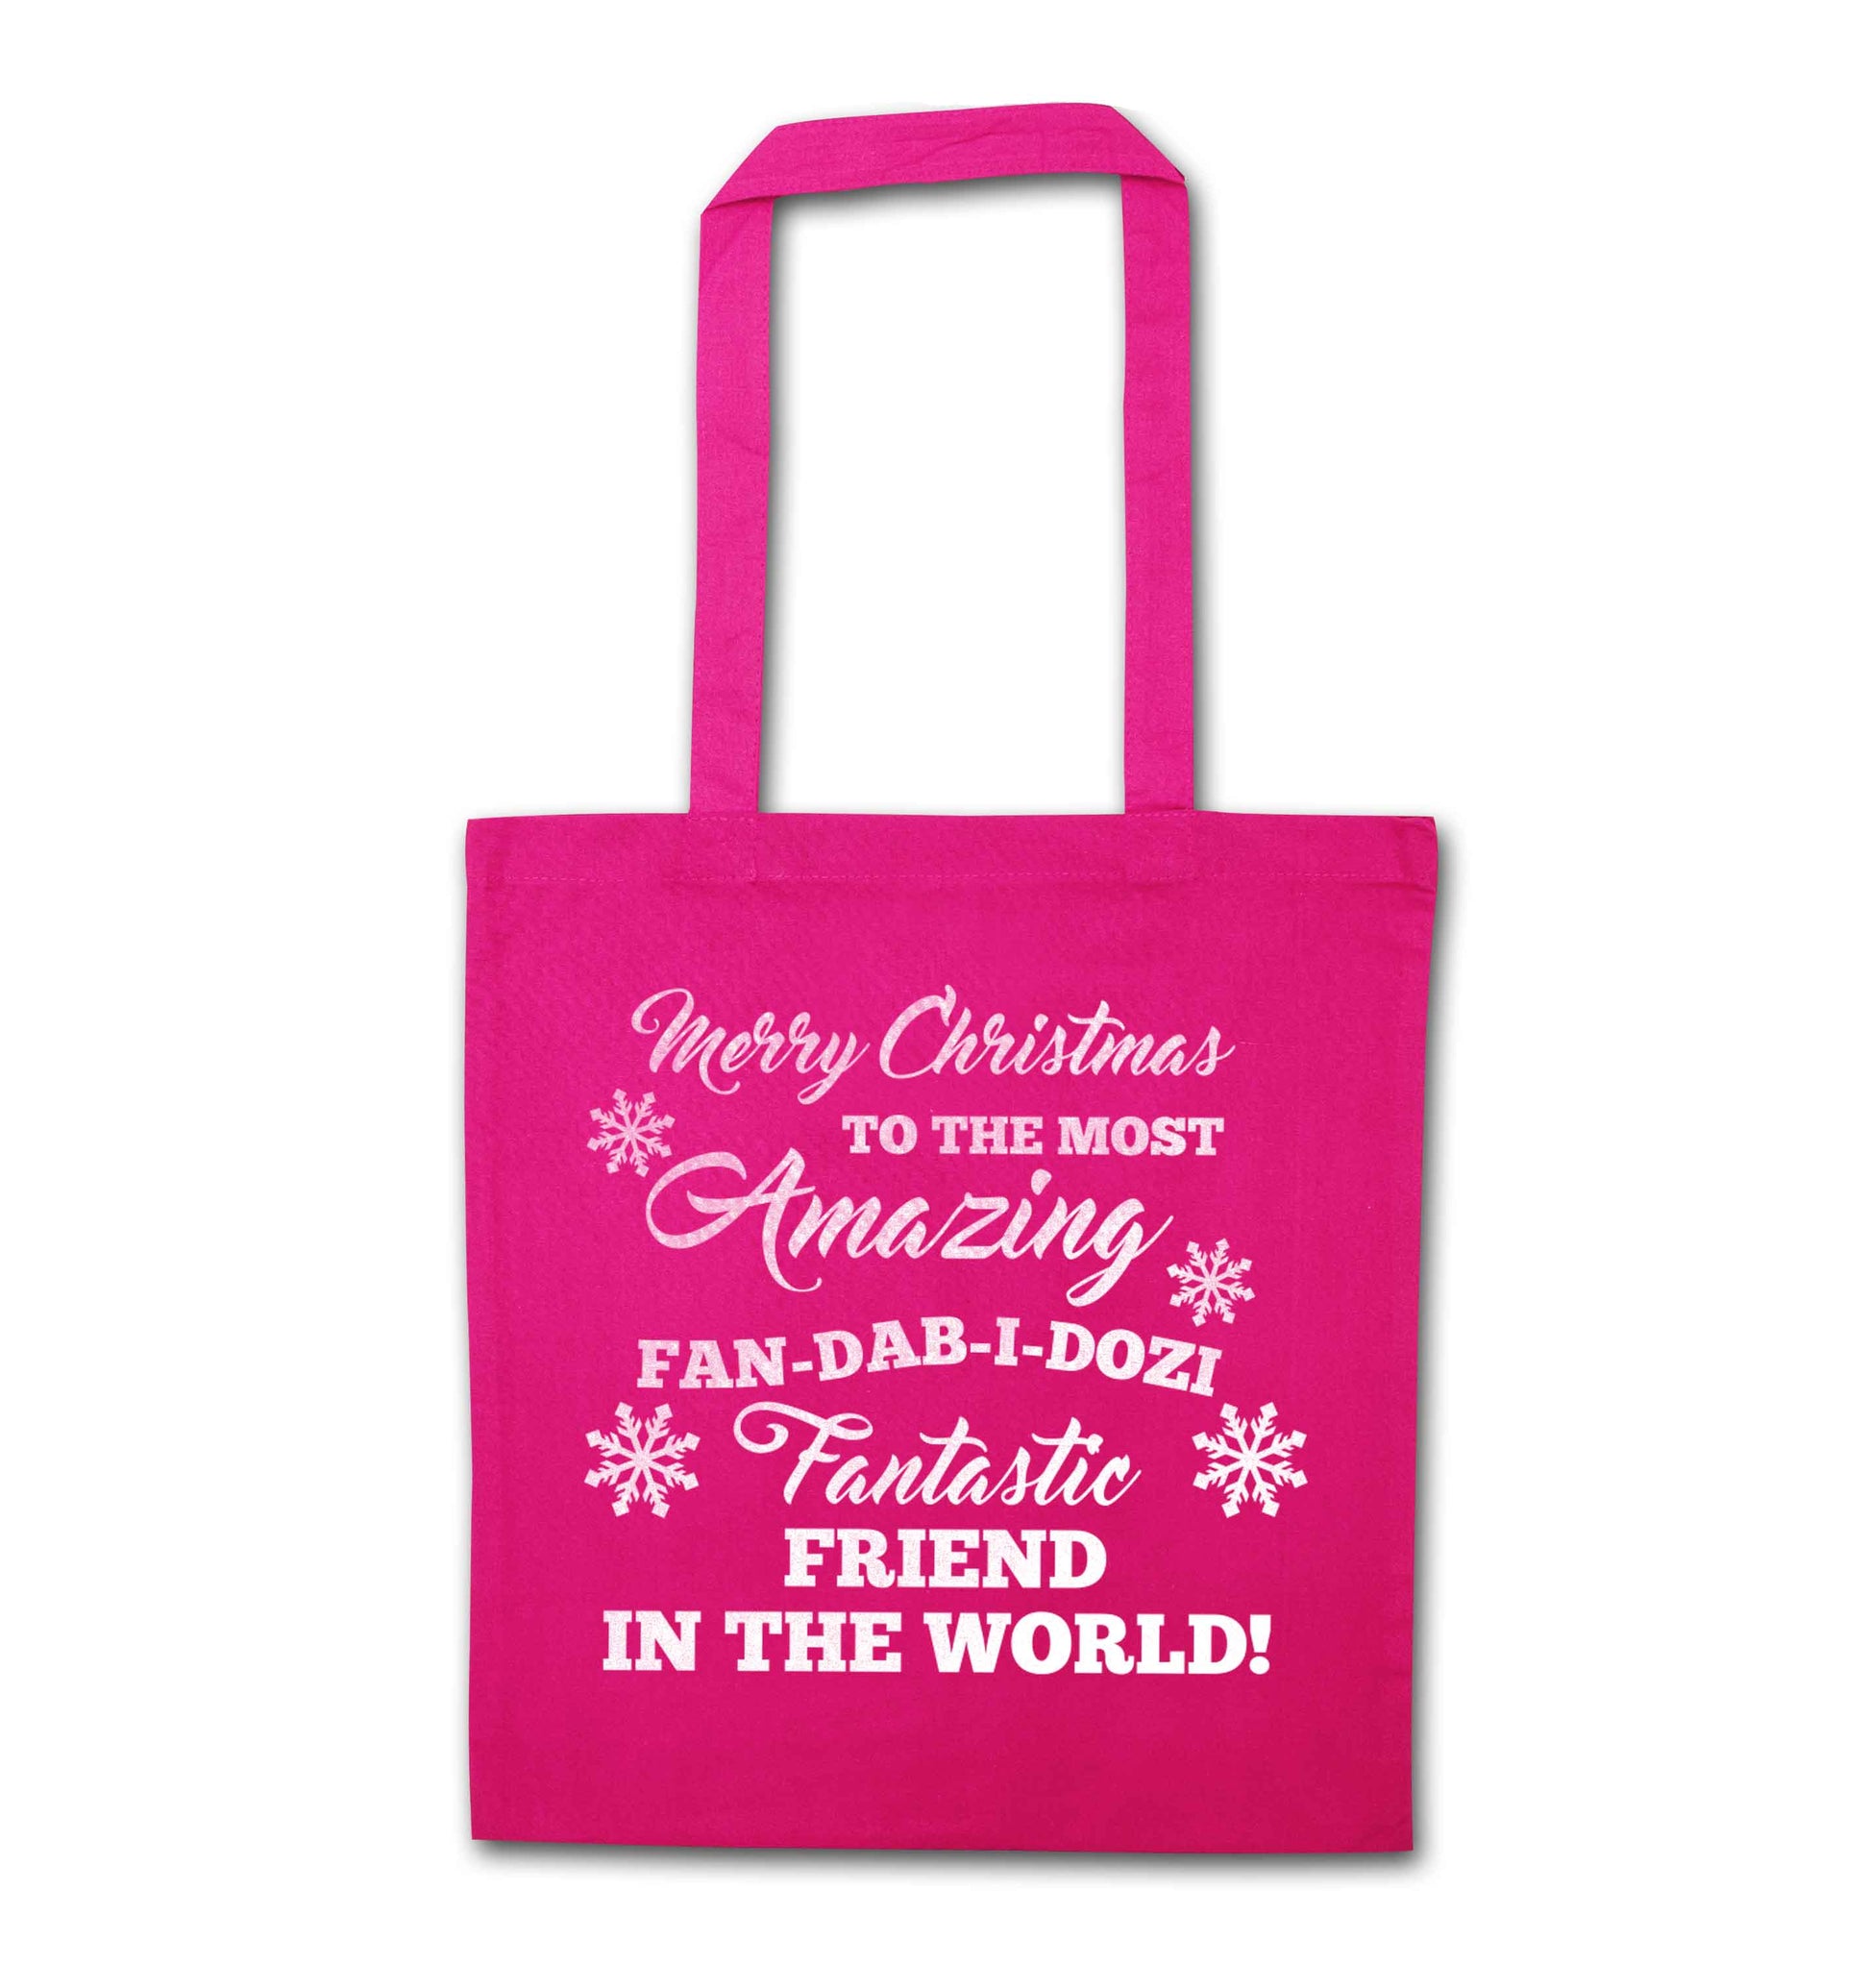 Merry Christmas to the most amazing fan-dab-i-dozi fantasic friend in the world pink tote bag